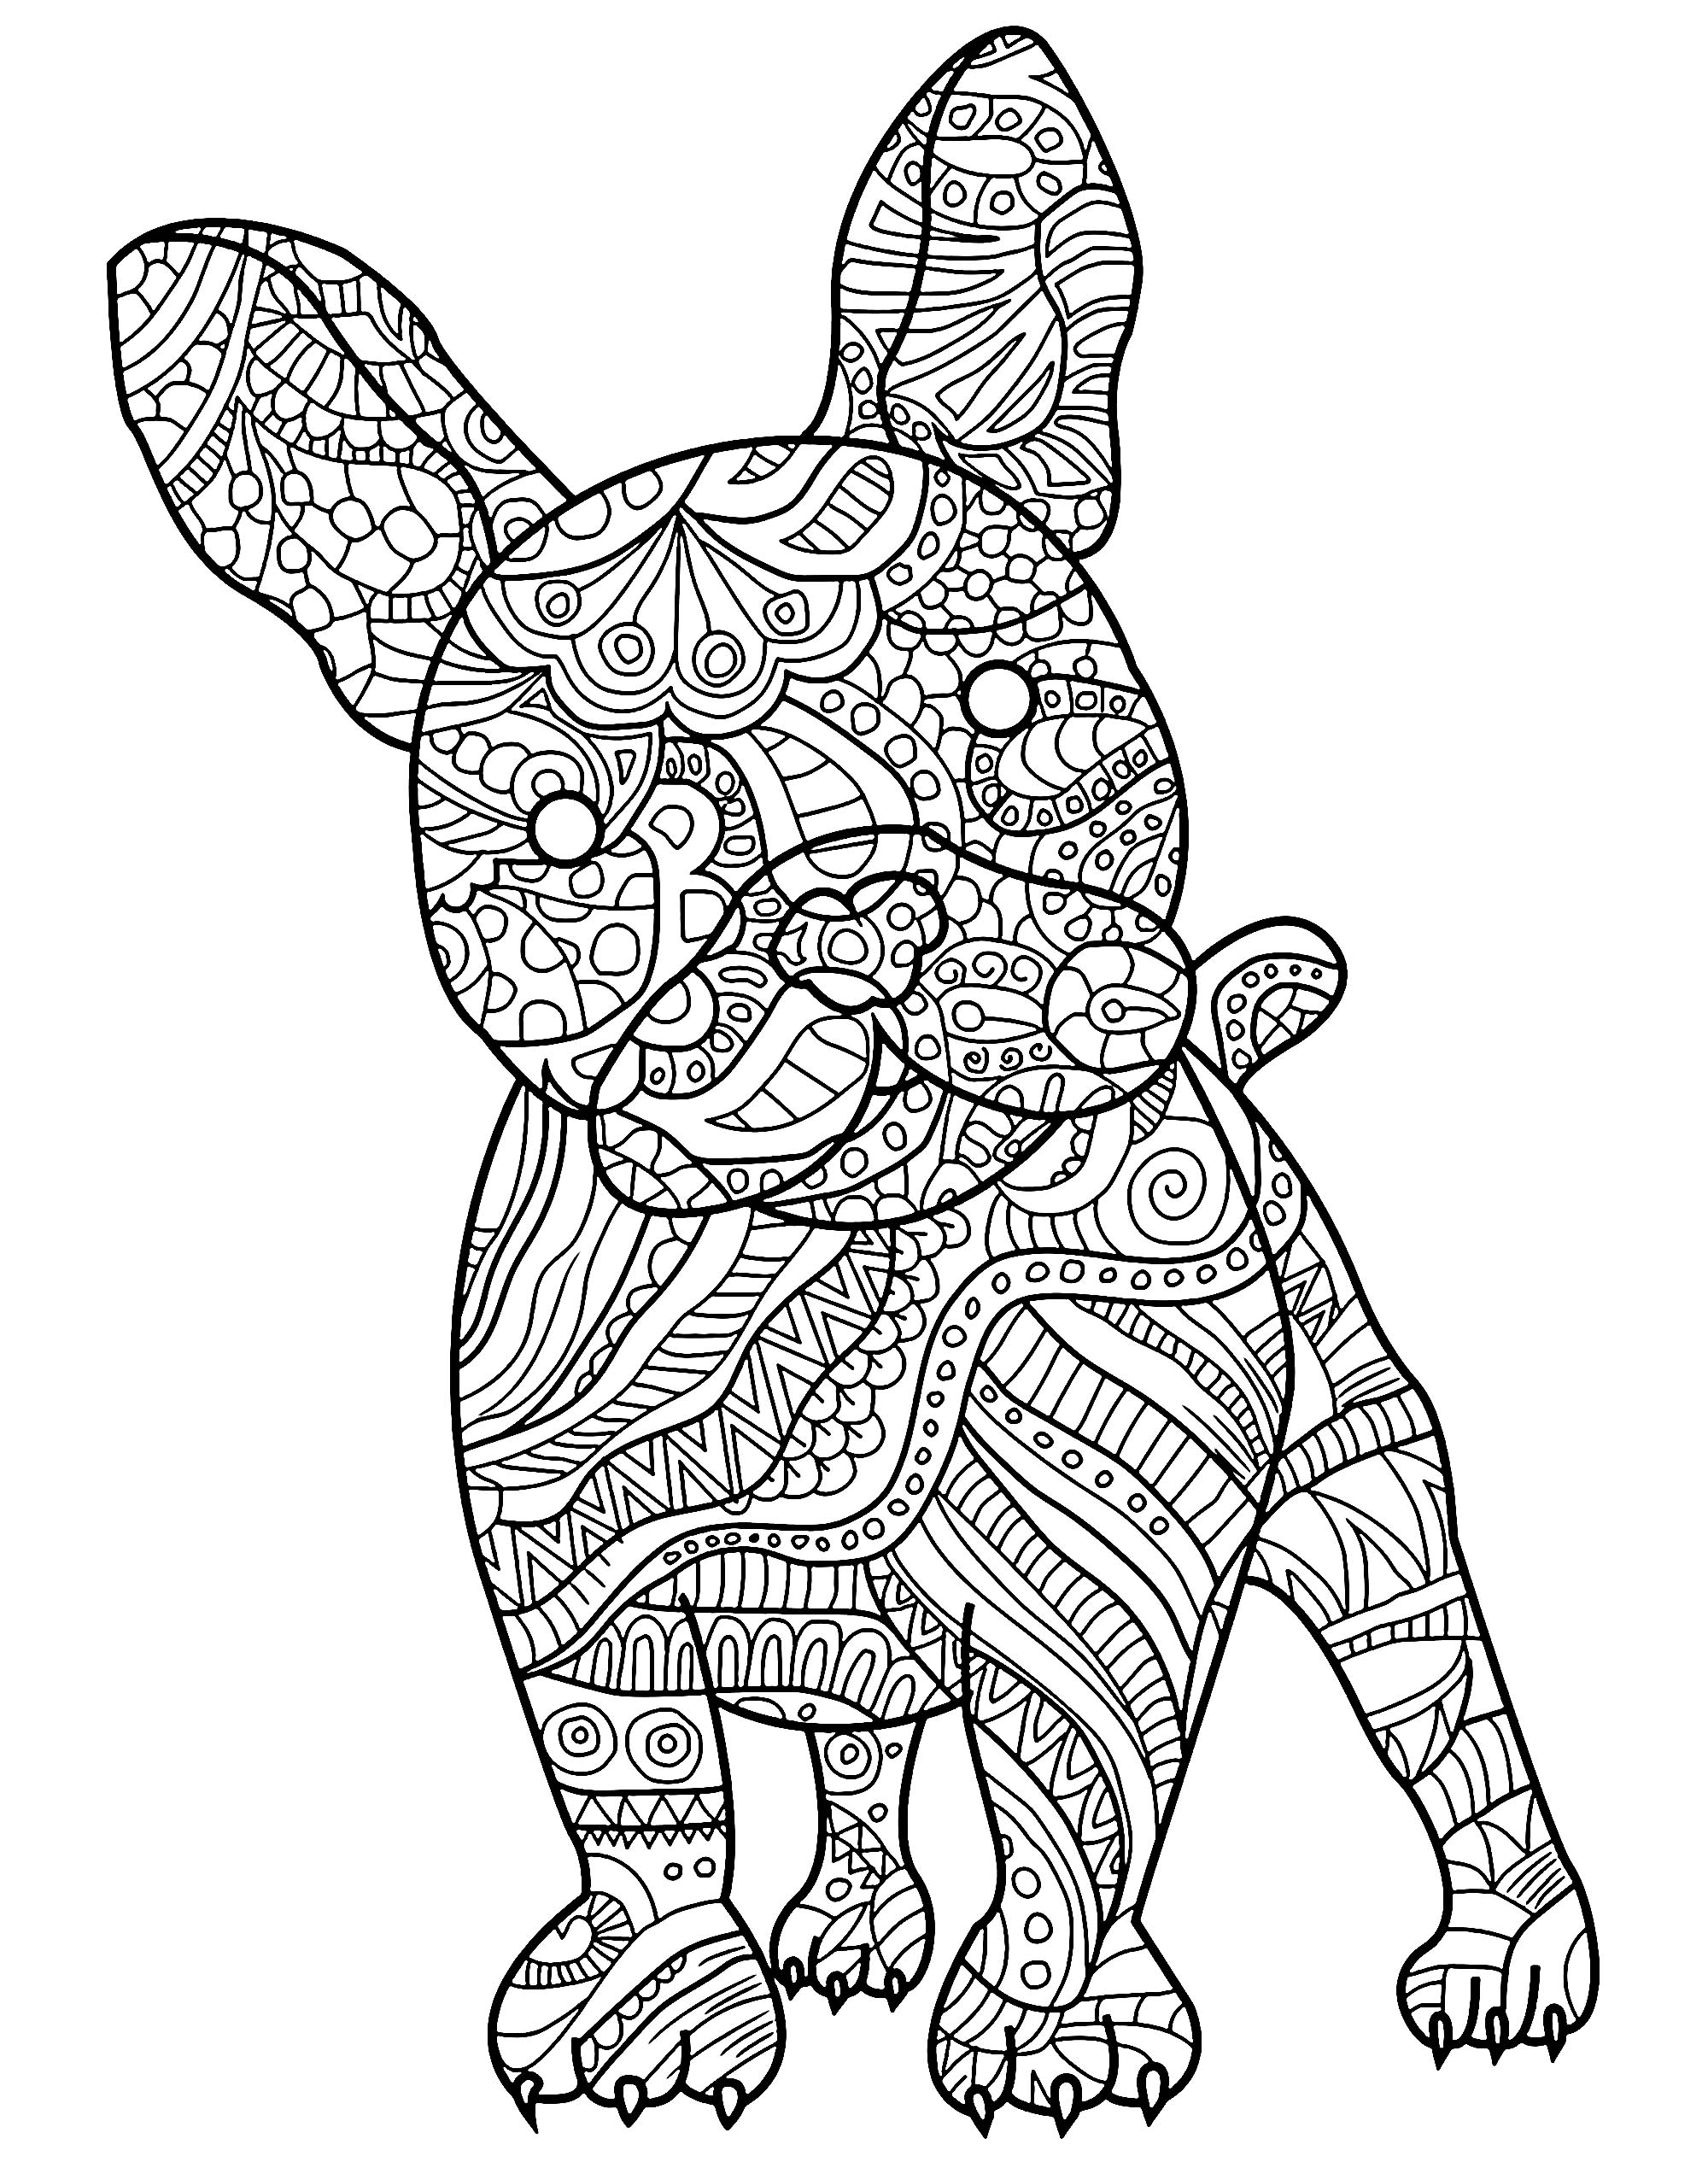 Dog to download for free - Dogs Kids Coloring Pages